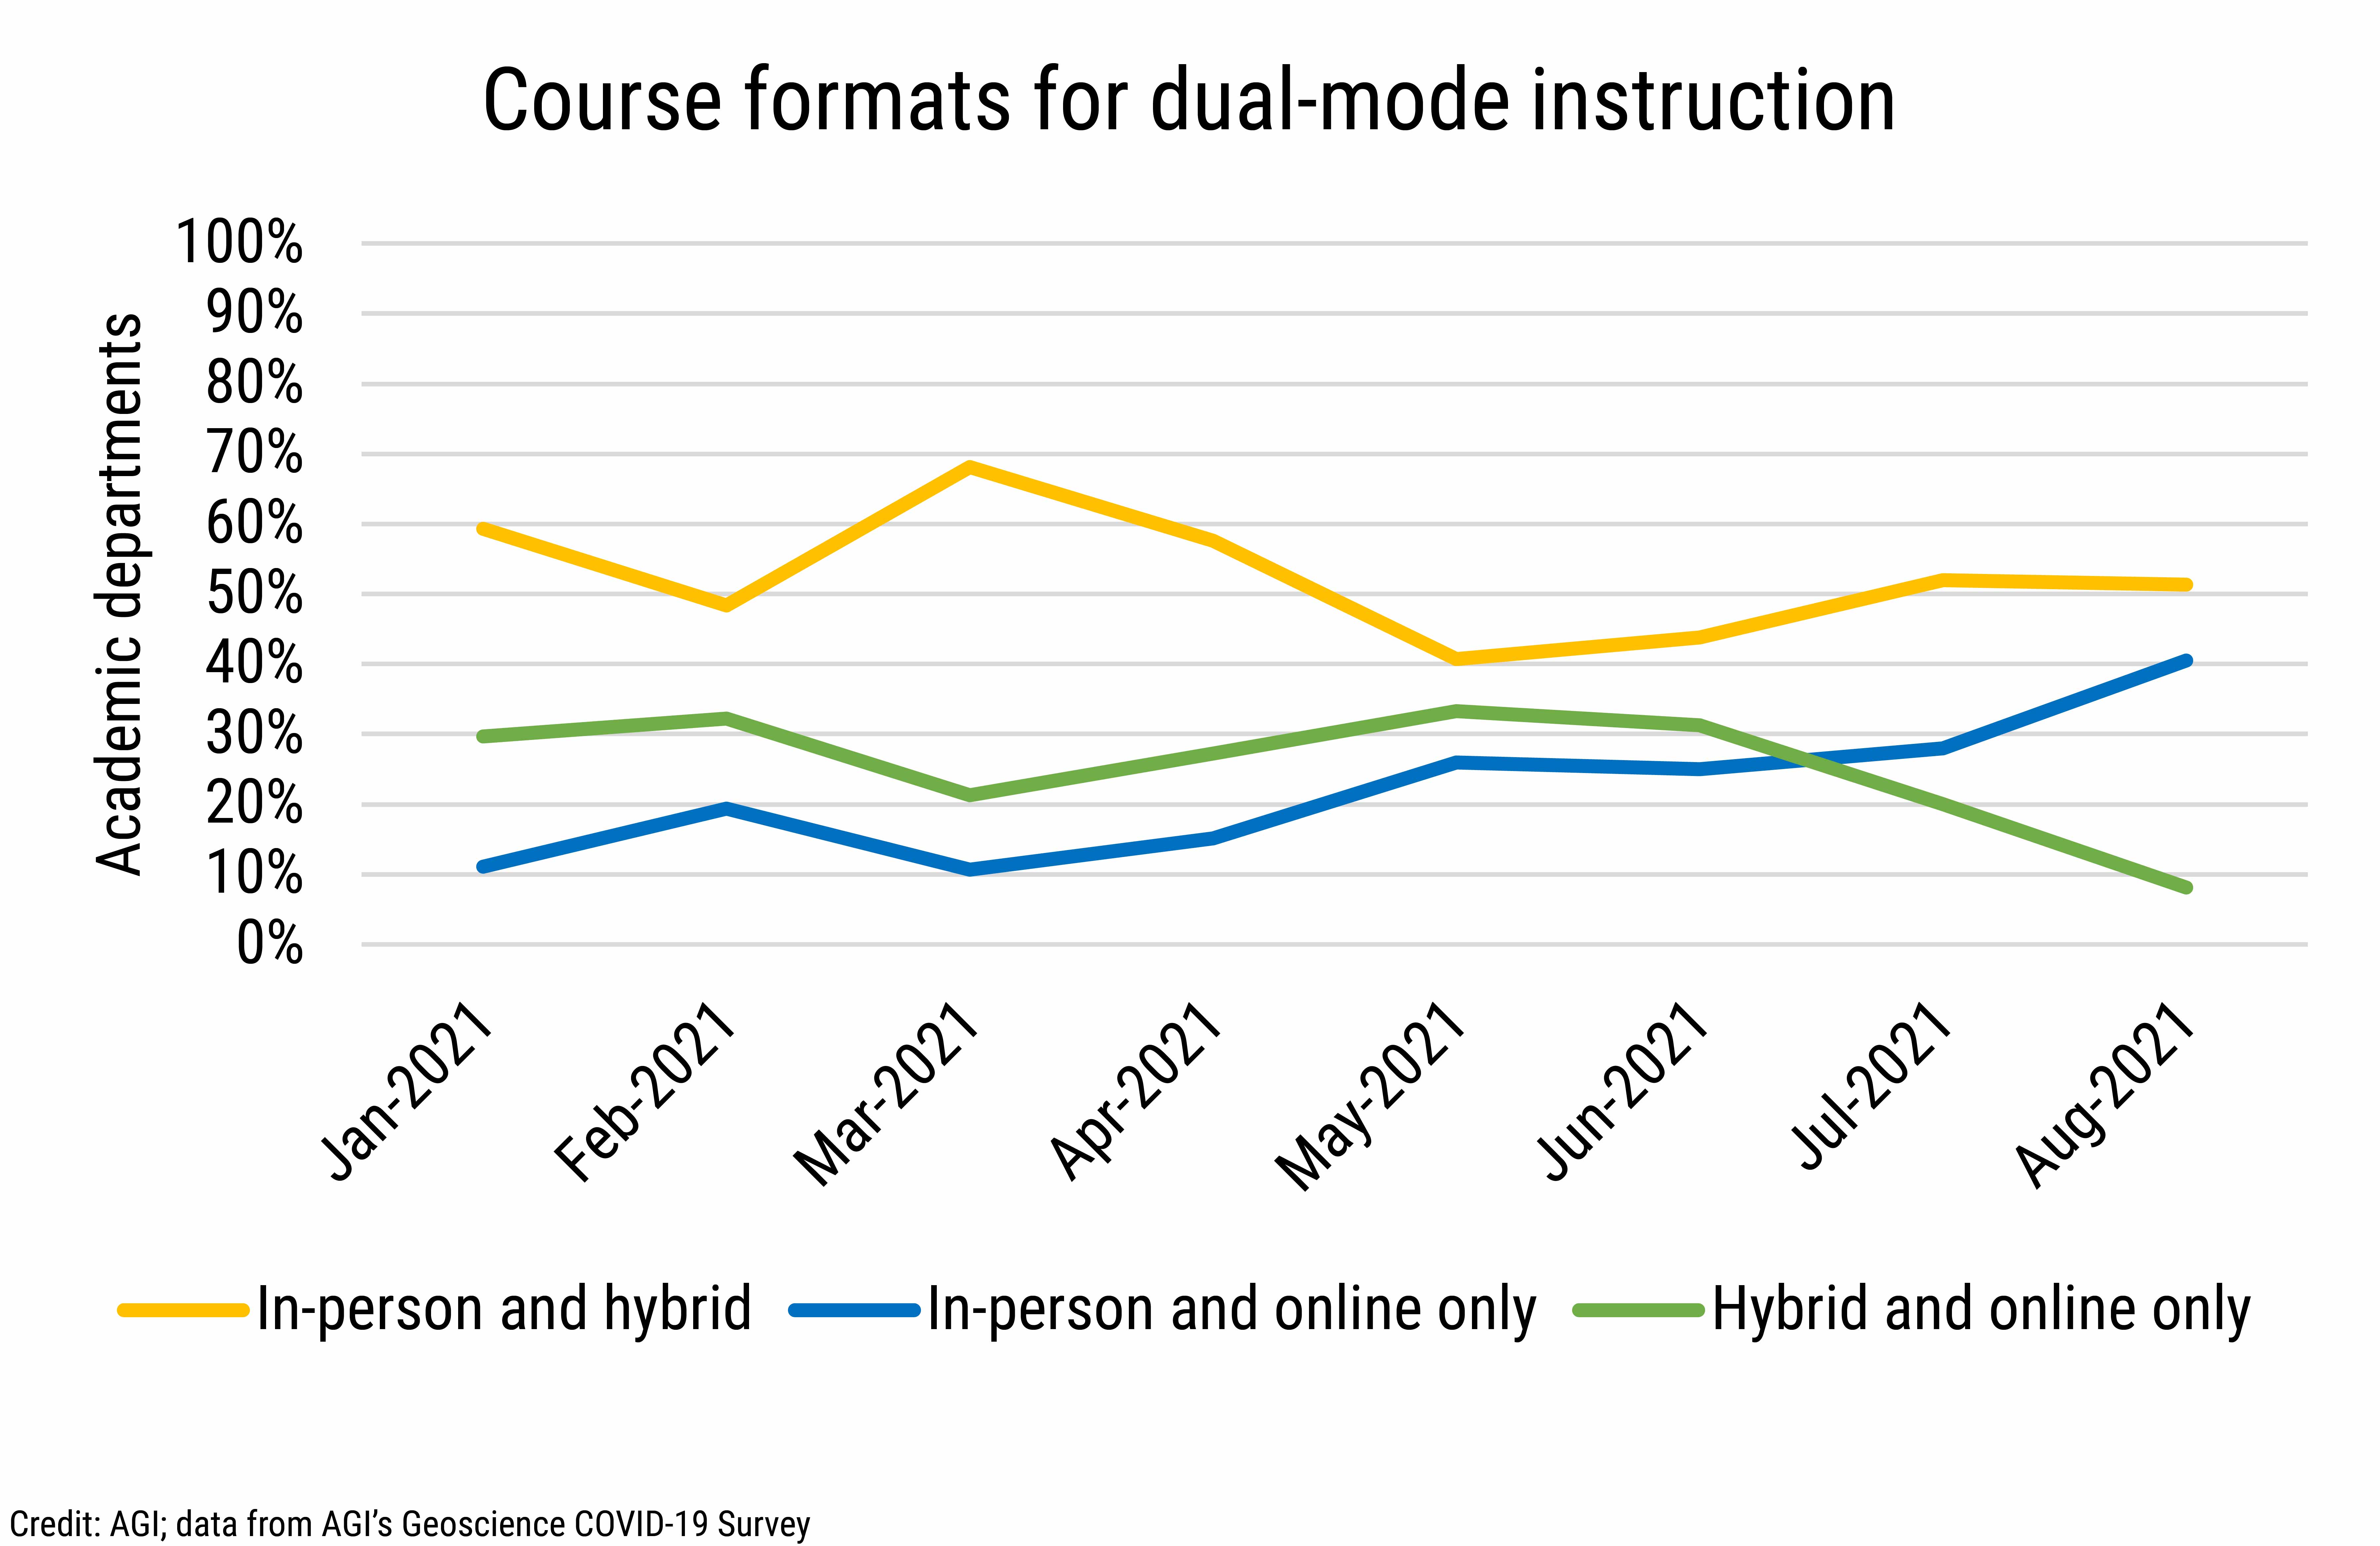 DB_2021-027 chart 03: Course instructional formats for dual-mode instruction (Credit: AGI; data from AGI's Geoscience COVID-19 Survey)